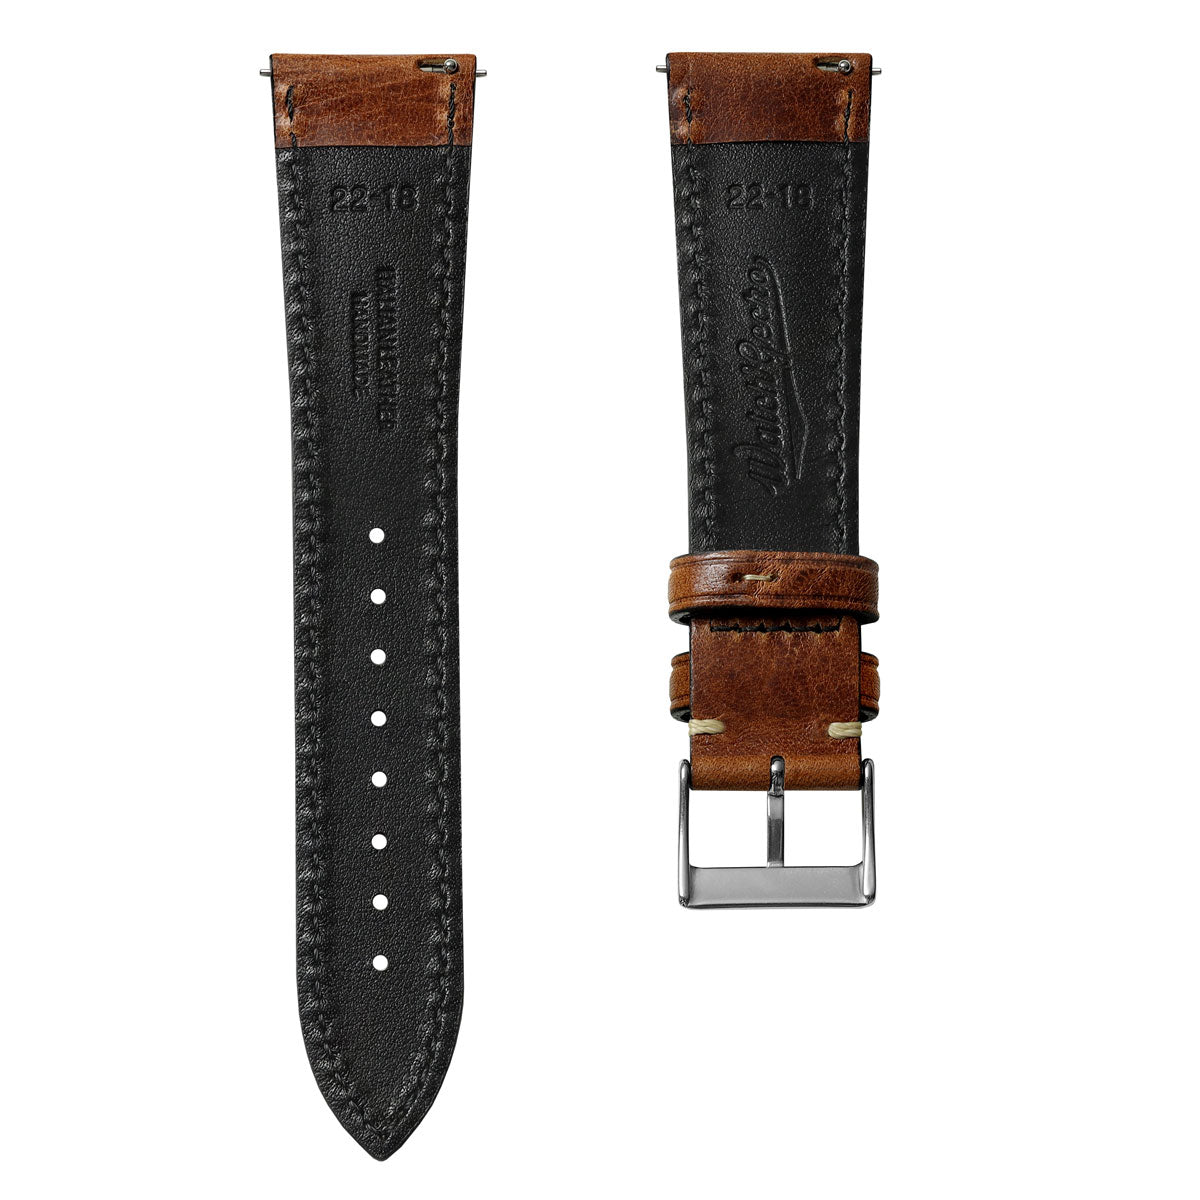 Classic Highley Genuine Leather Watch Strap - Reddish Brown